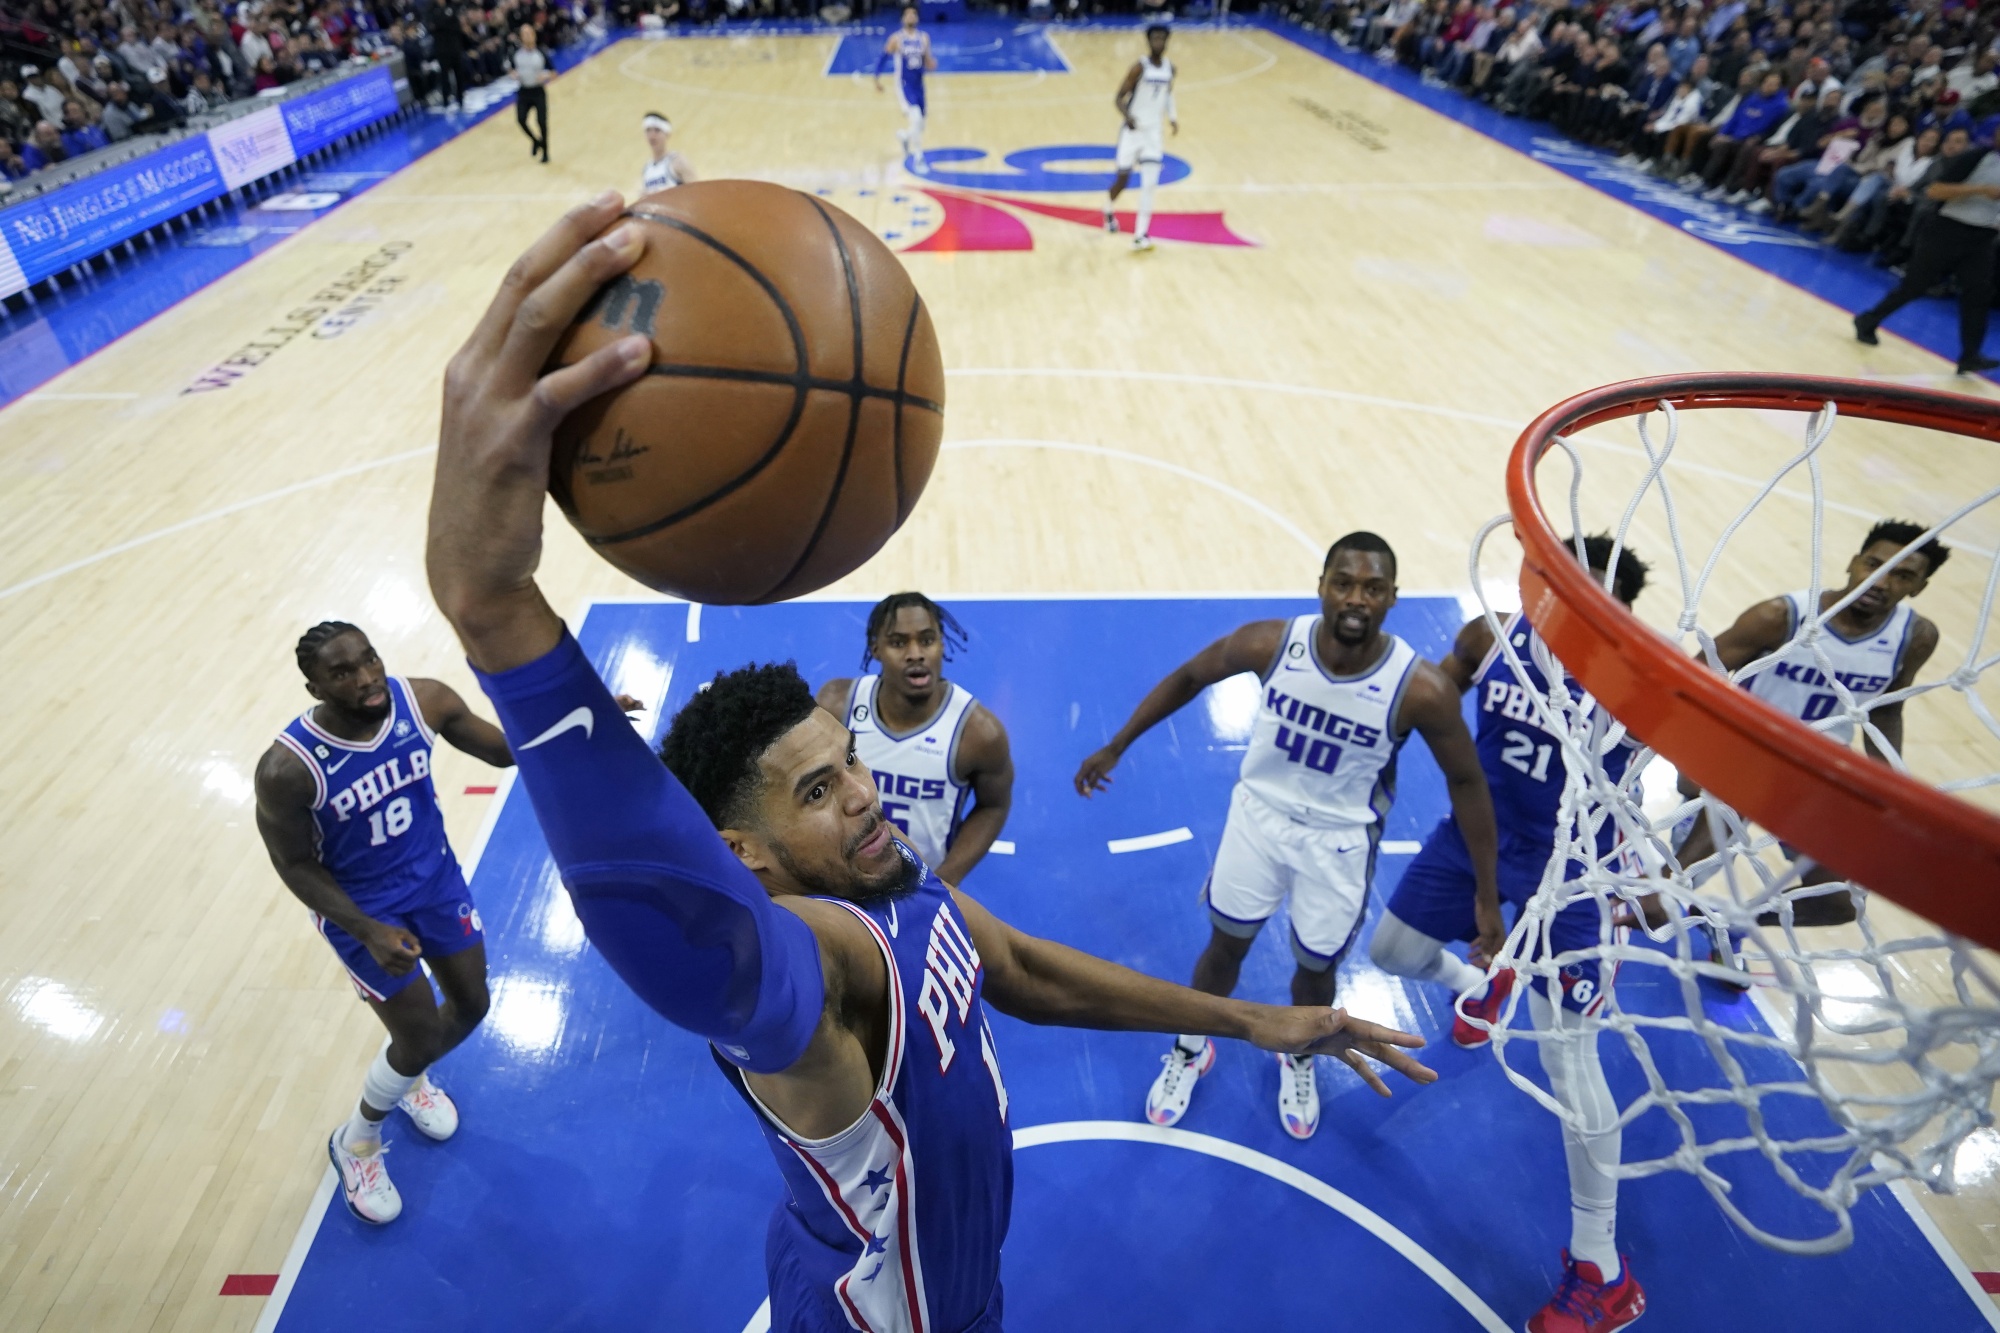 Philadelphia 76ers' Tobias Harris is investing in his life after